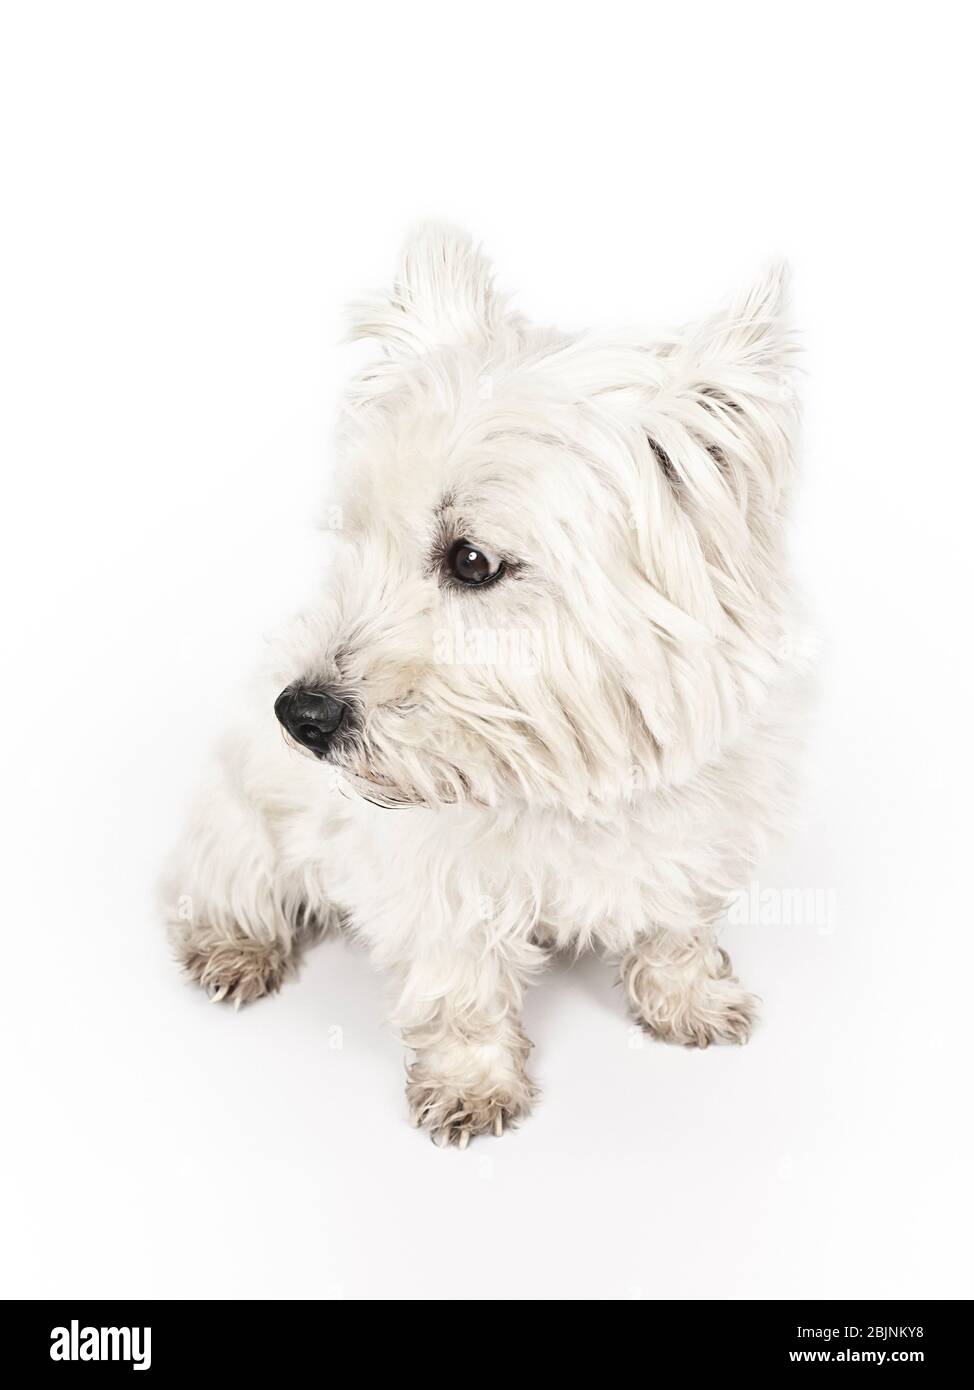 West Highland White Terrier, Westie (Canis lupus f. familiaris), sitting, side glance Stock Photo